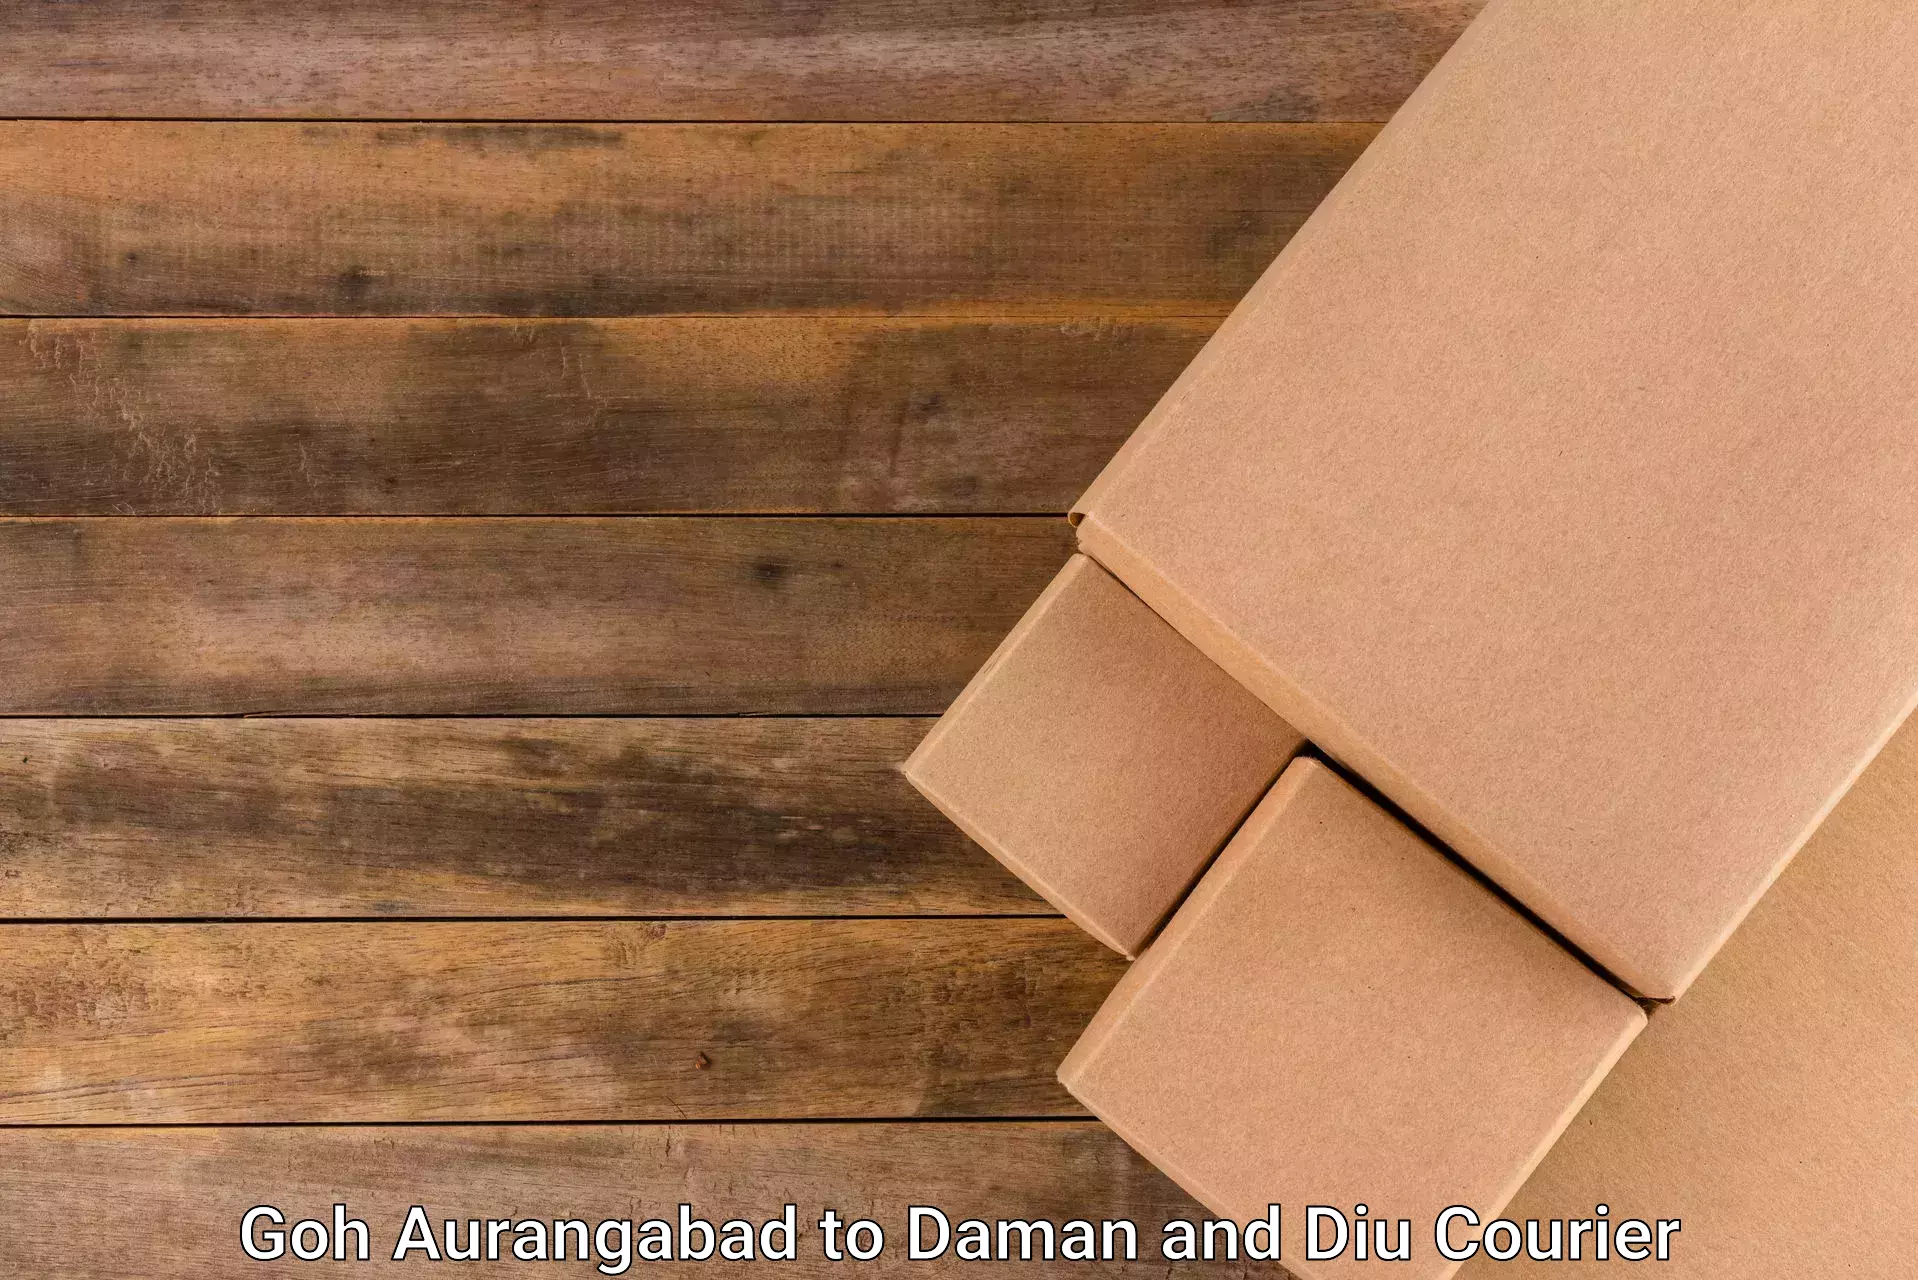 Customized delivery options Goh Aurangabad to Diu